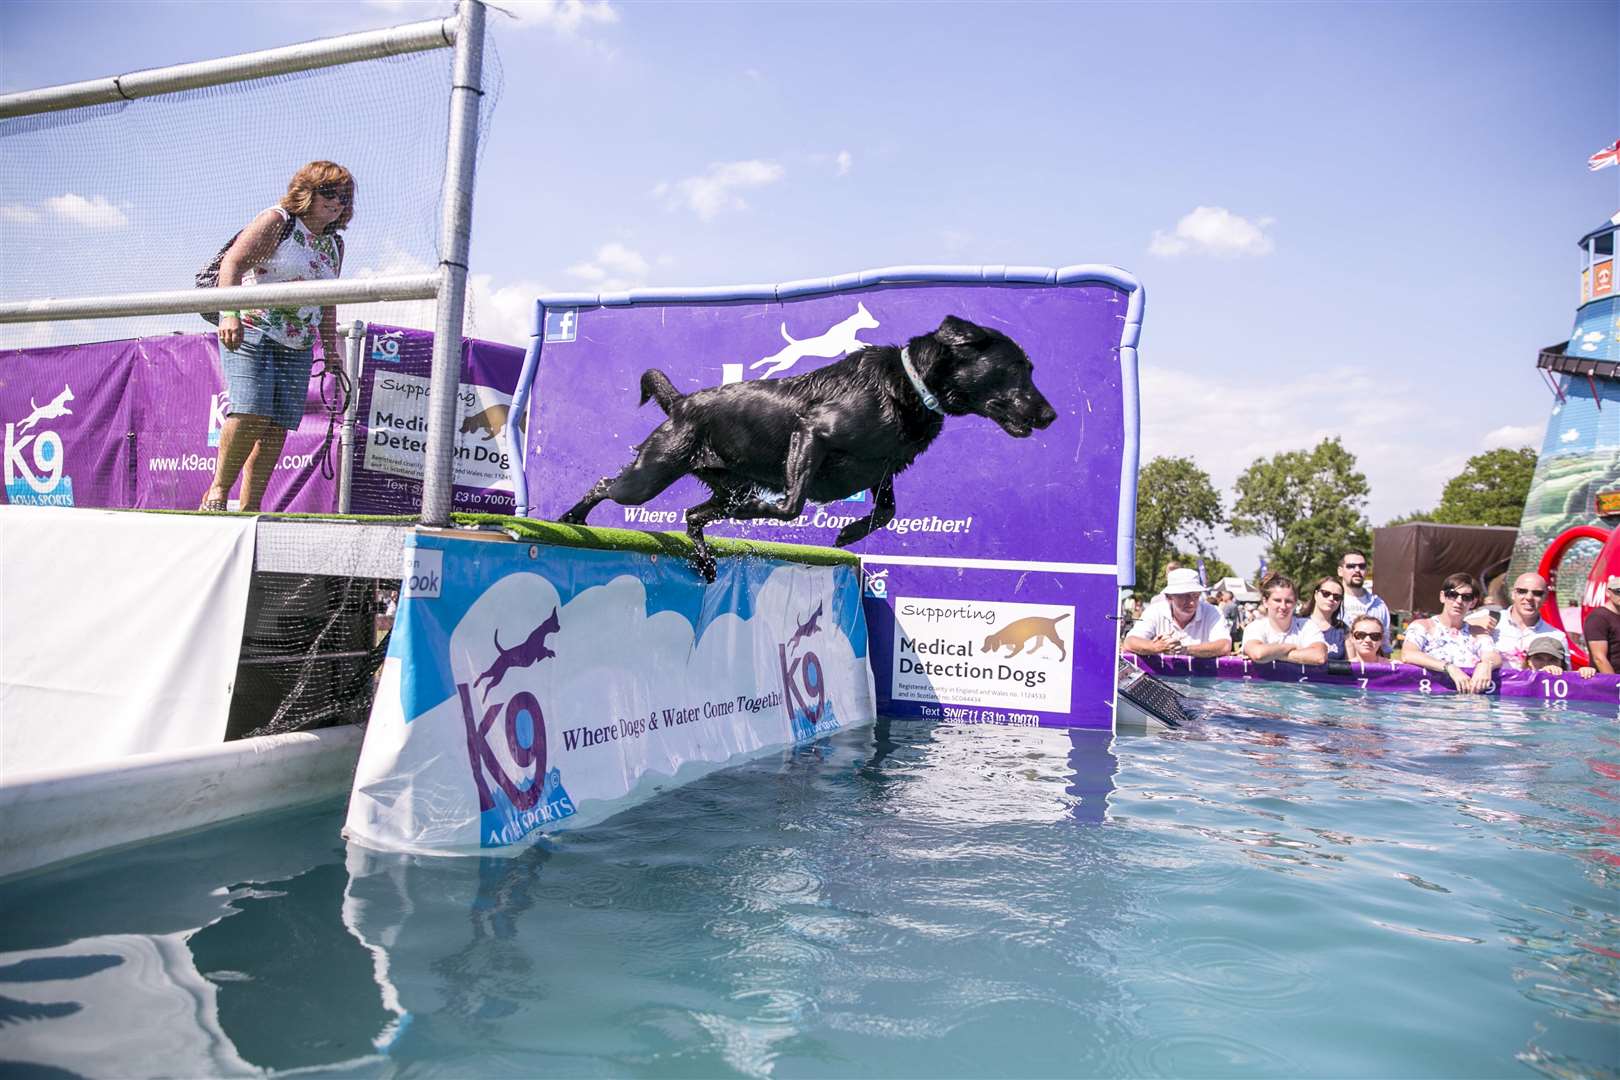 Take your dog for a splash at the show Picture: Thomas Alexander